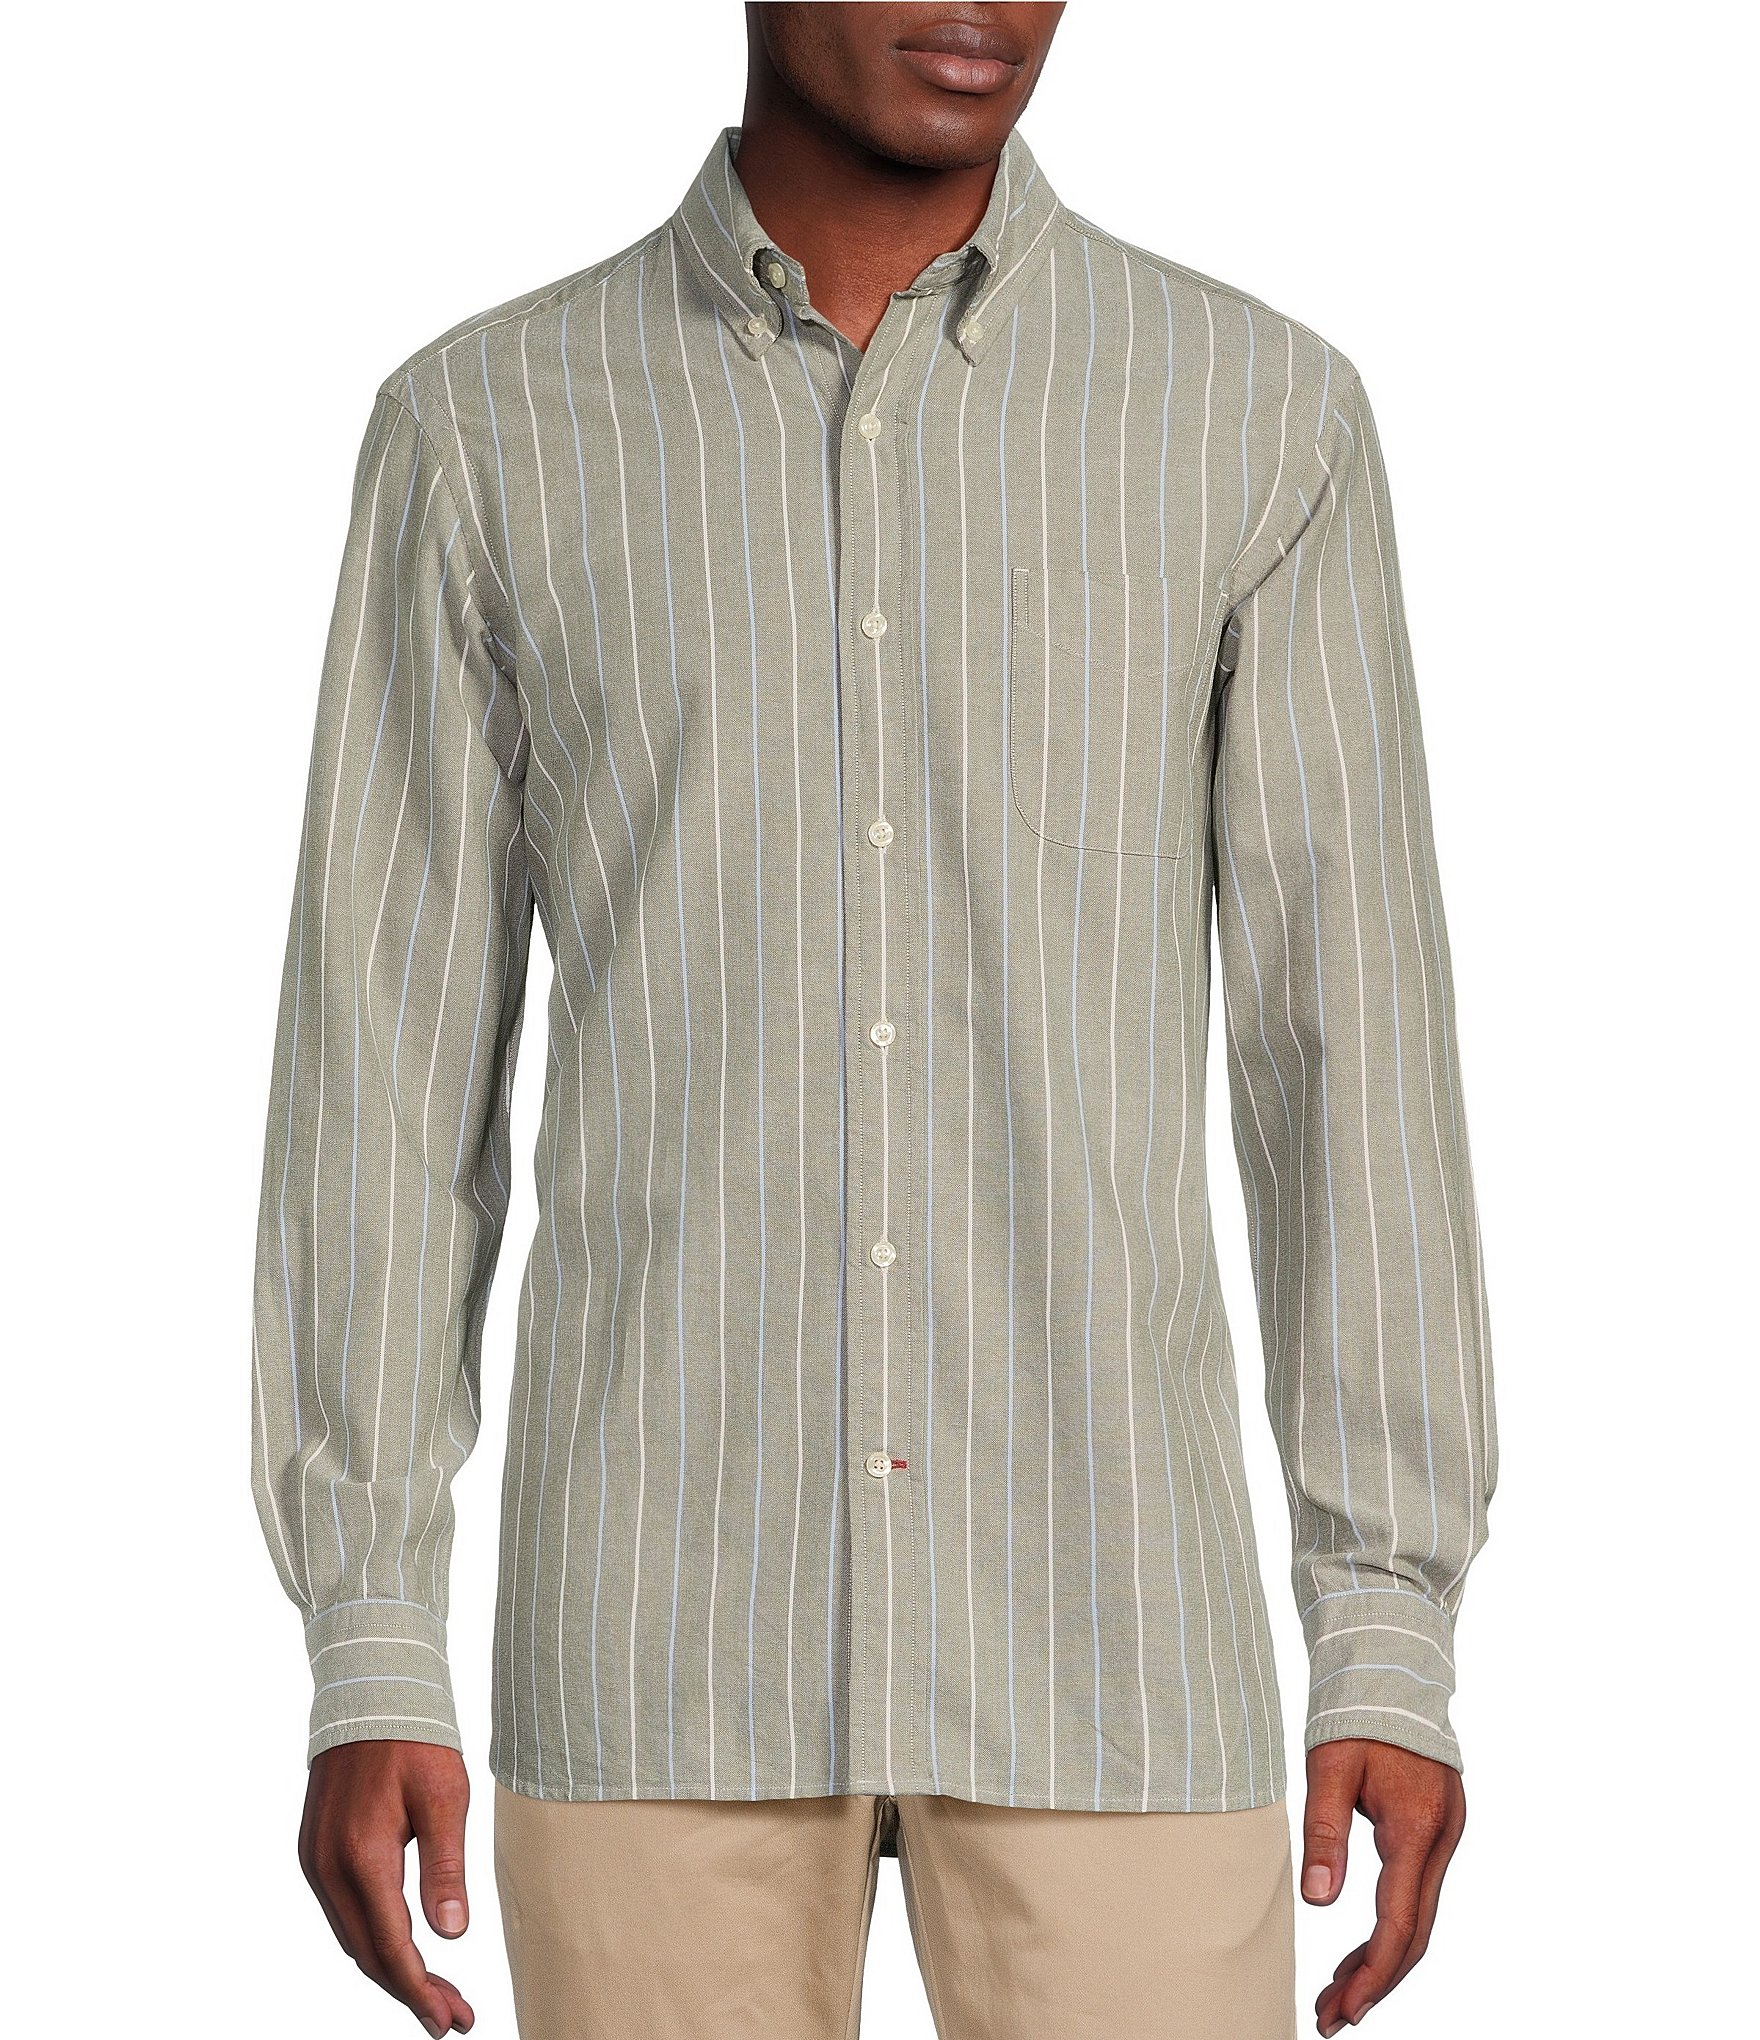 Cremieux Blue Label Slim Fit Striped Oxford Long Sleeve Woven Shirt ...